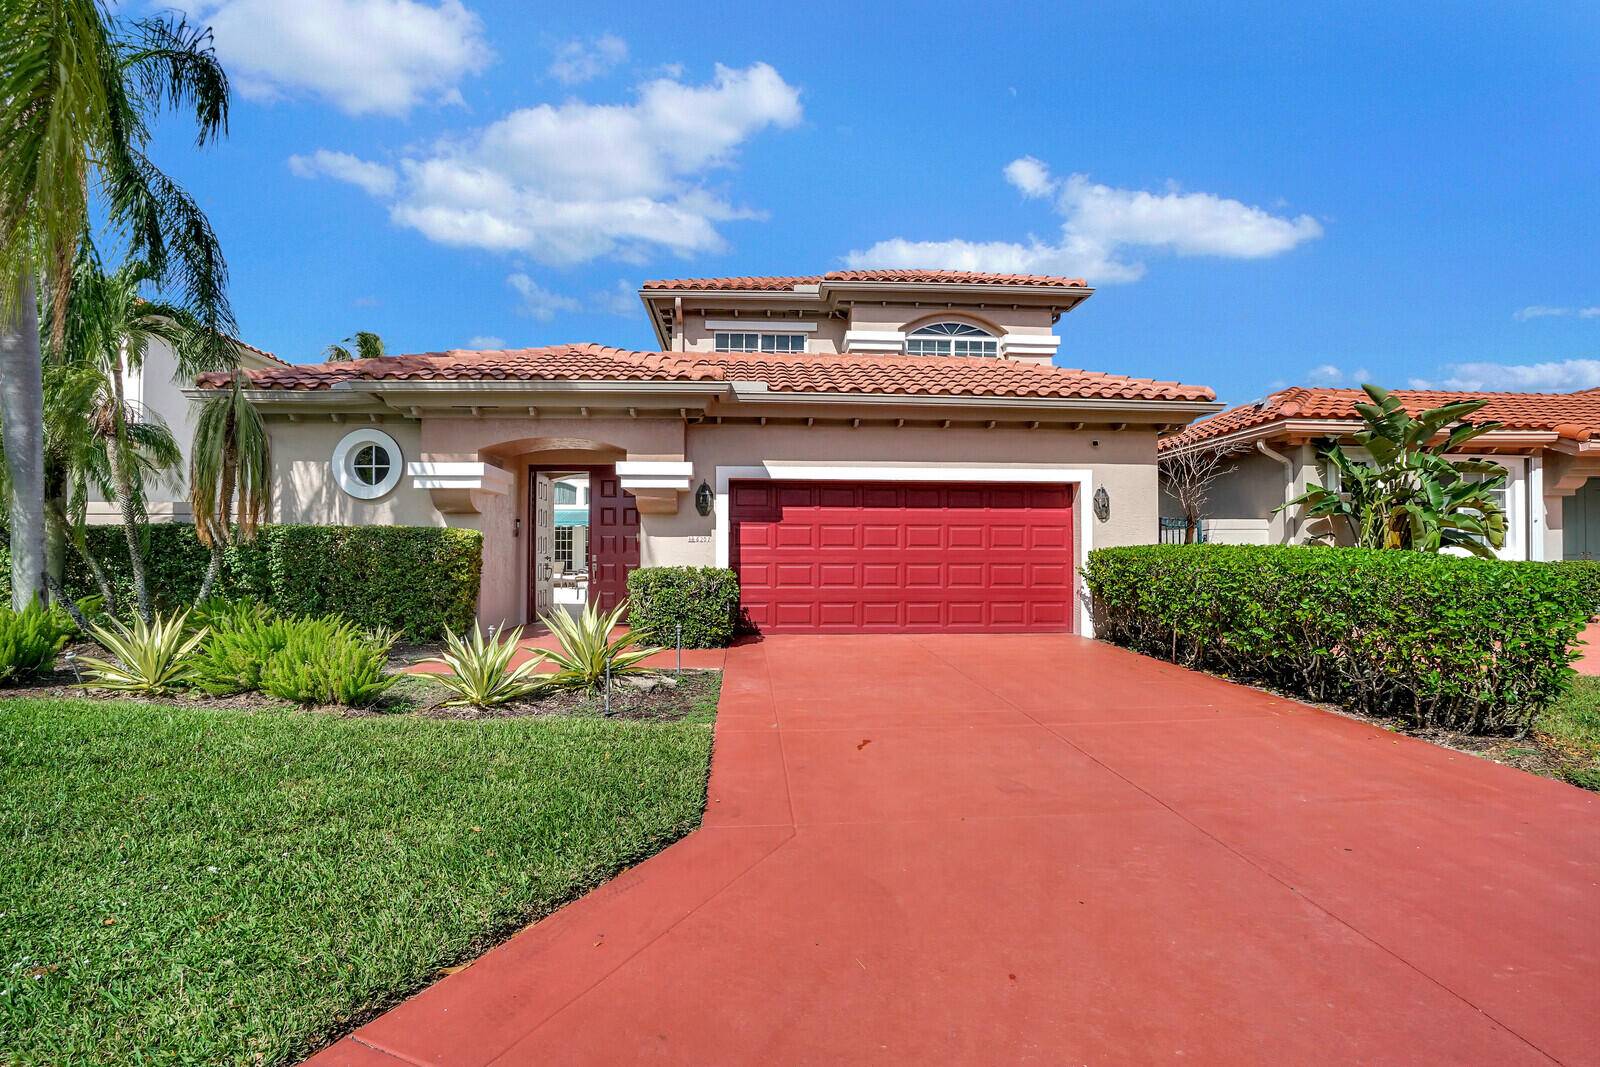 One of the nicest homes in Santa Barbara a gem of a community centrally located in the heart of Boca.